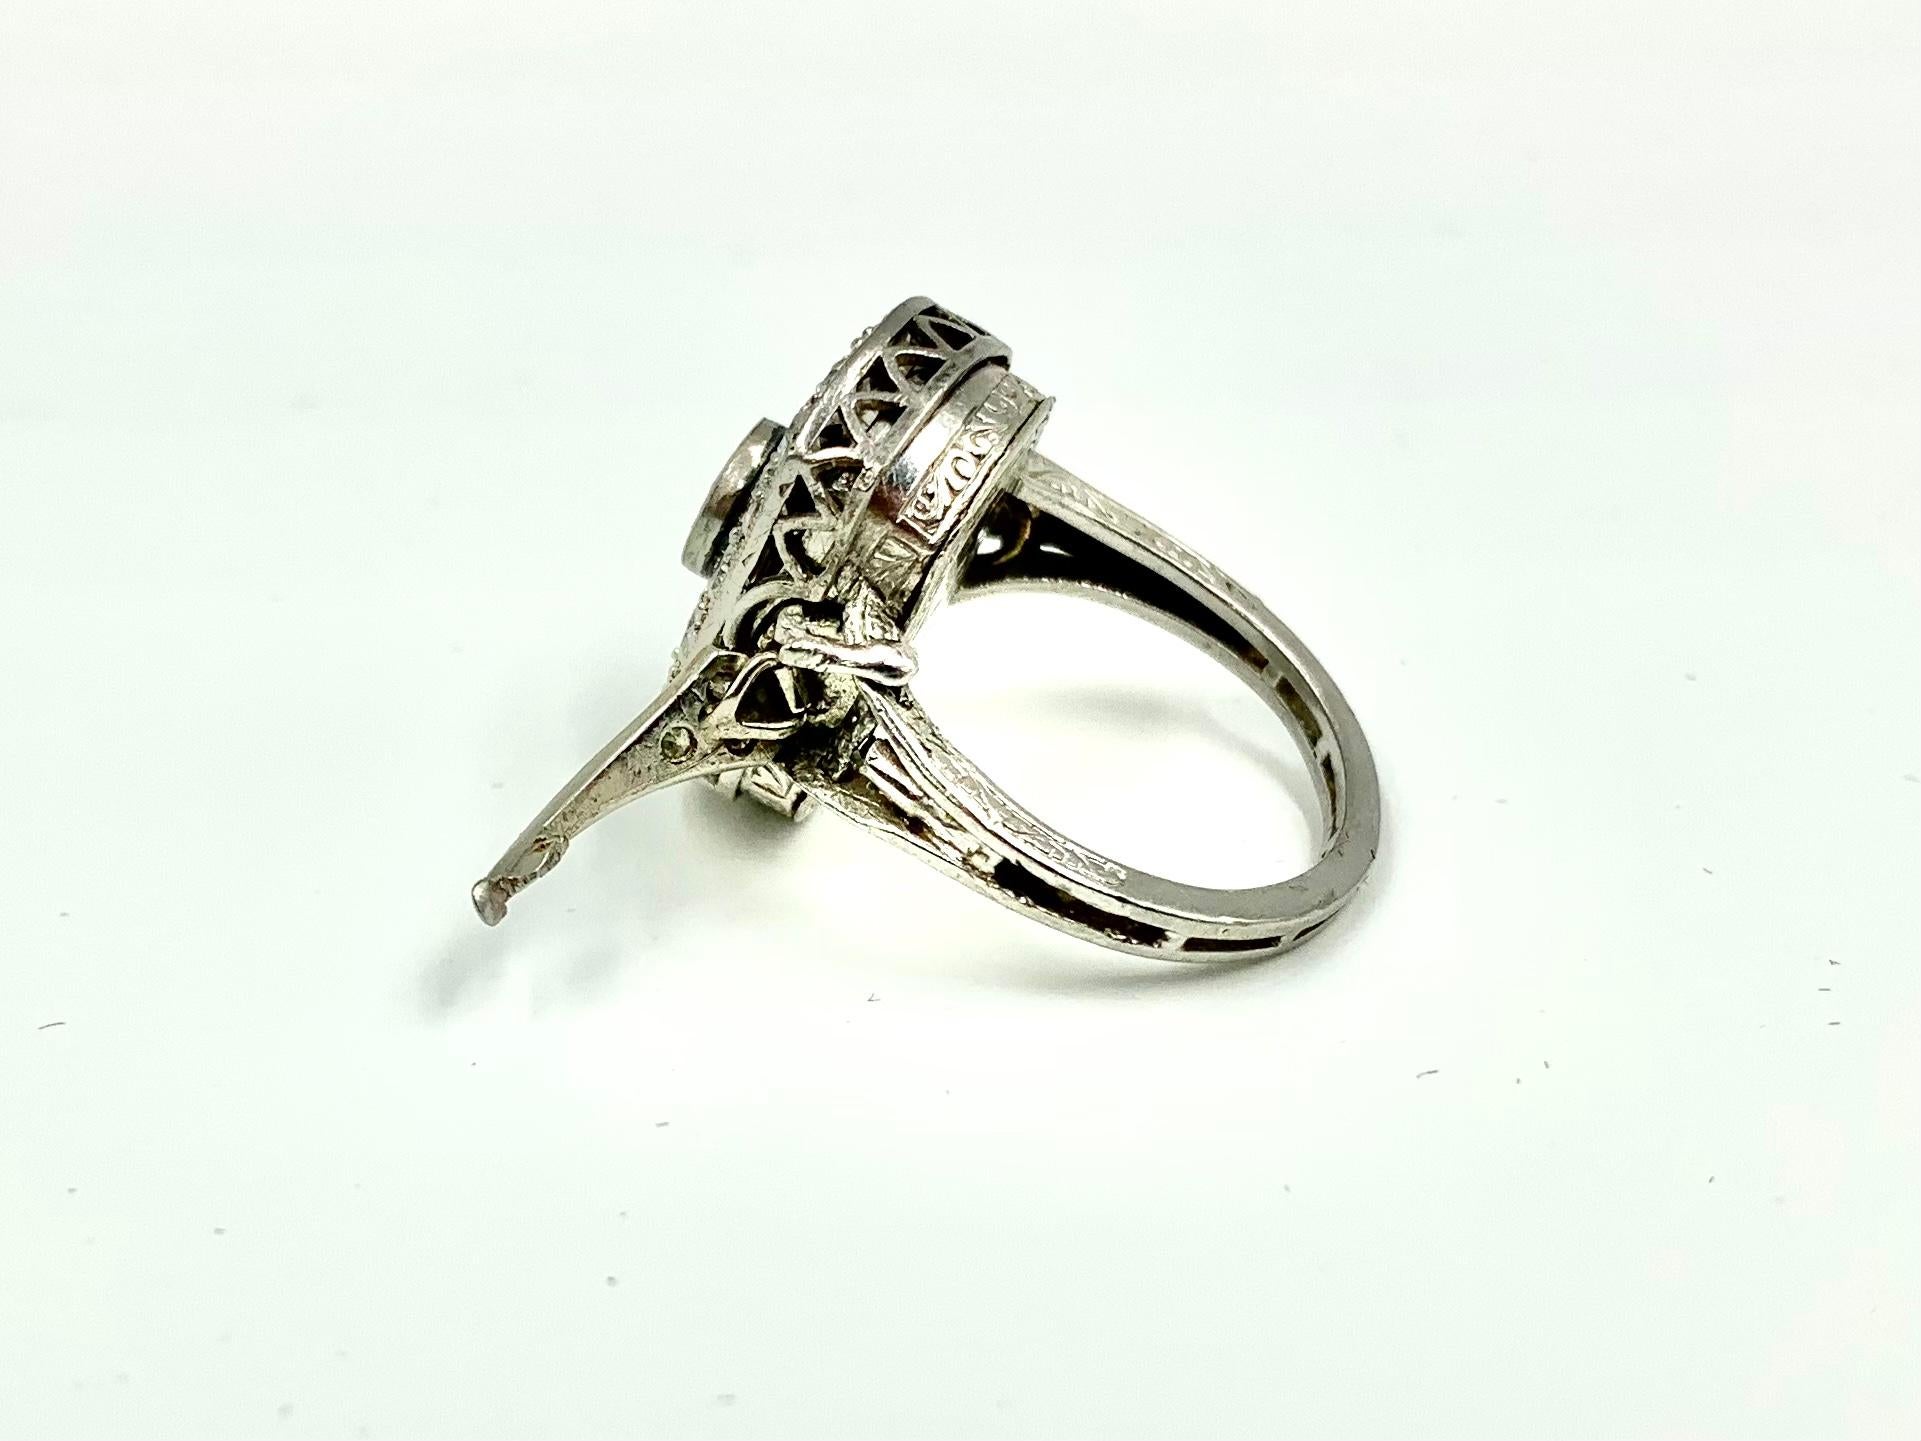 Rare Art Deco 2.30 TCW Diamond 14K White Gold Cocktail Ring with Concealed Watch For Sale 5